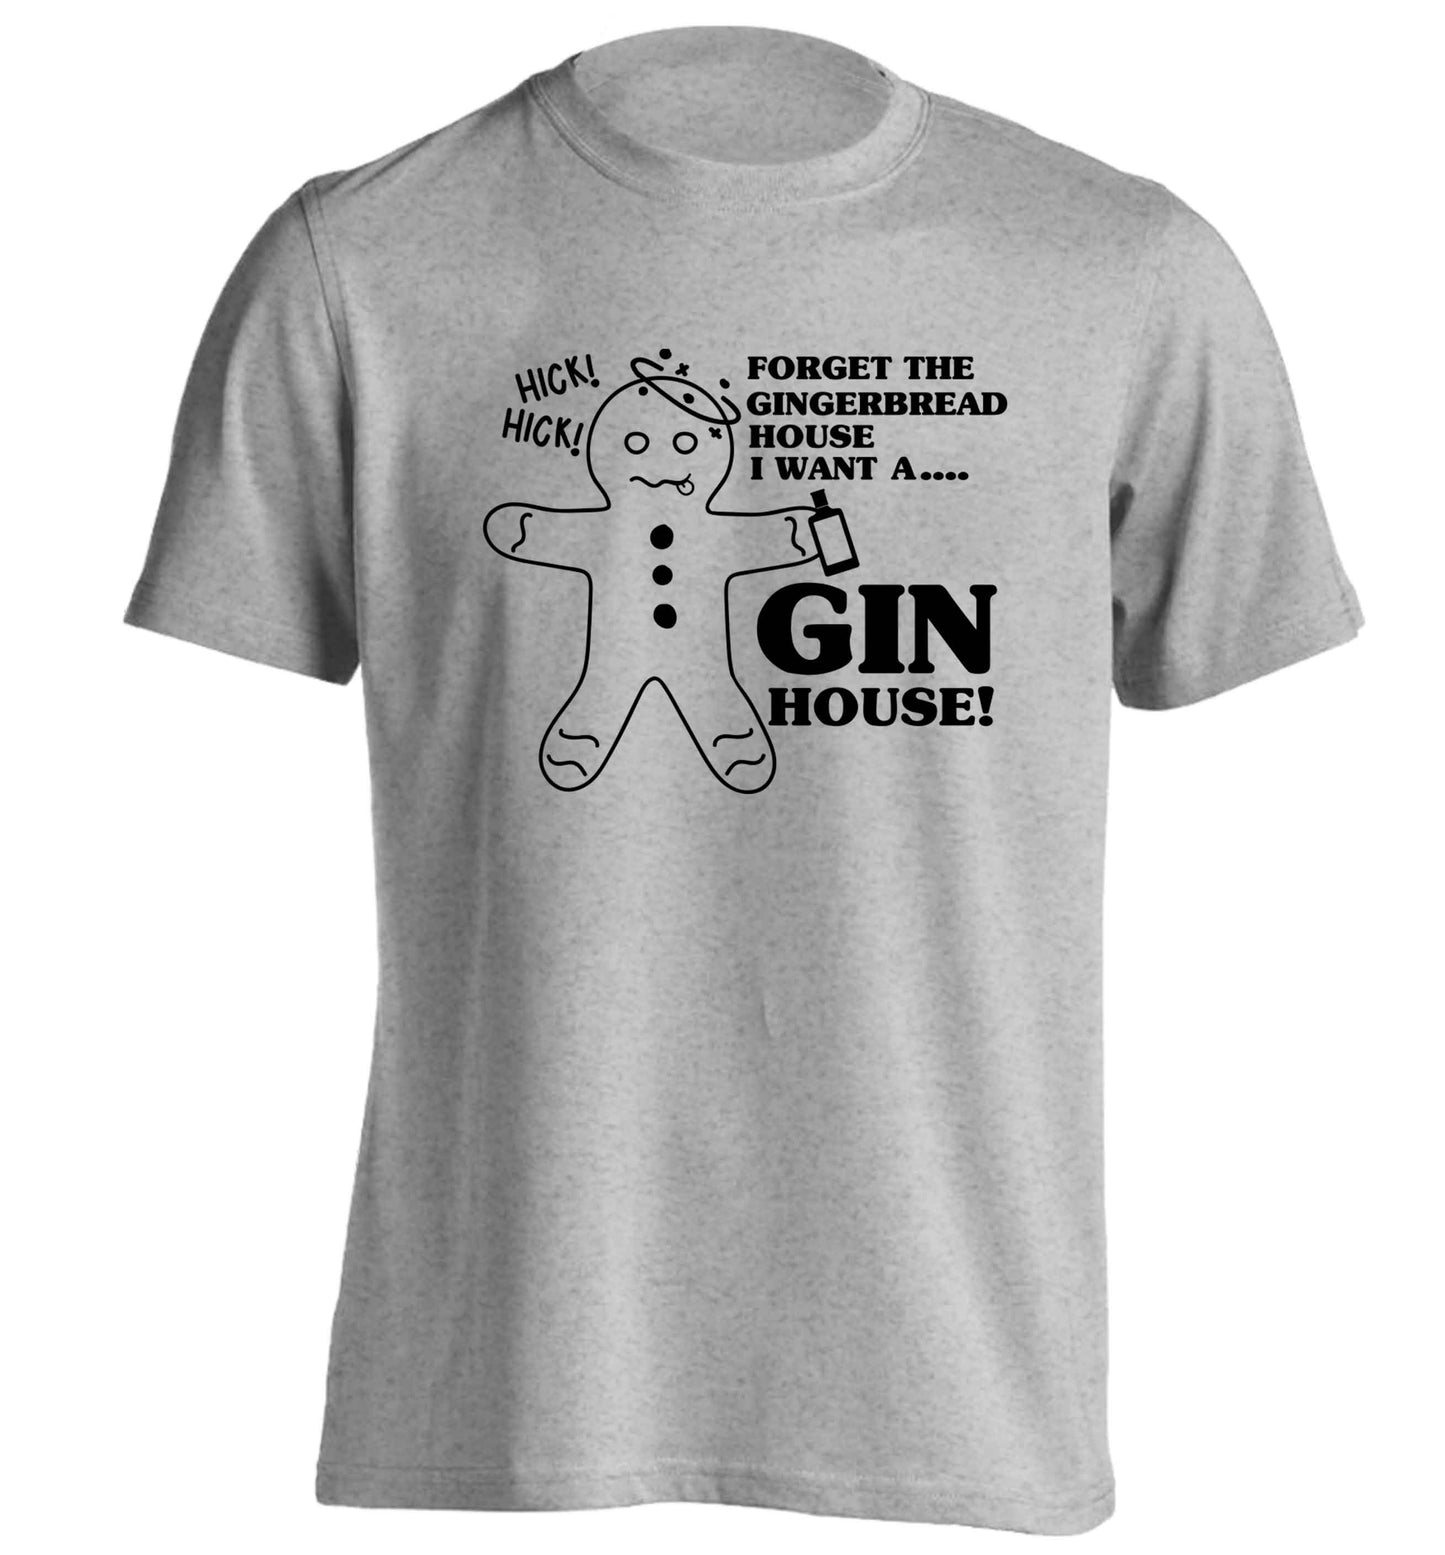 Forget the gingerbread house I want a gin house adults unisex grey Tshirt 2XL